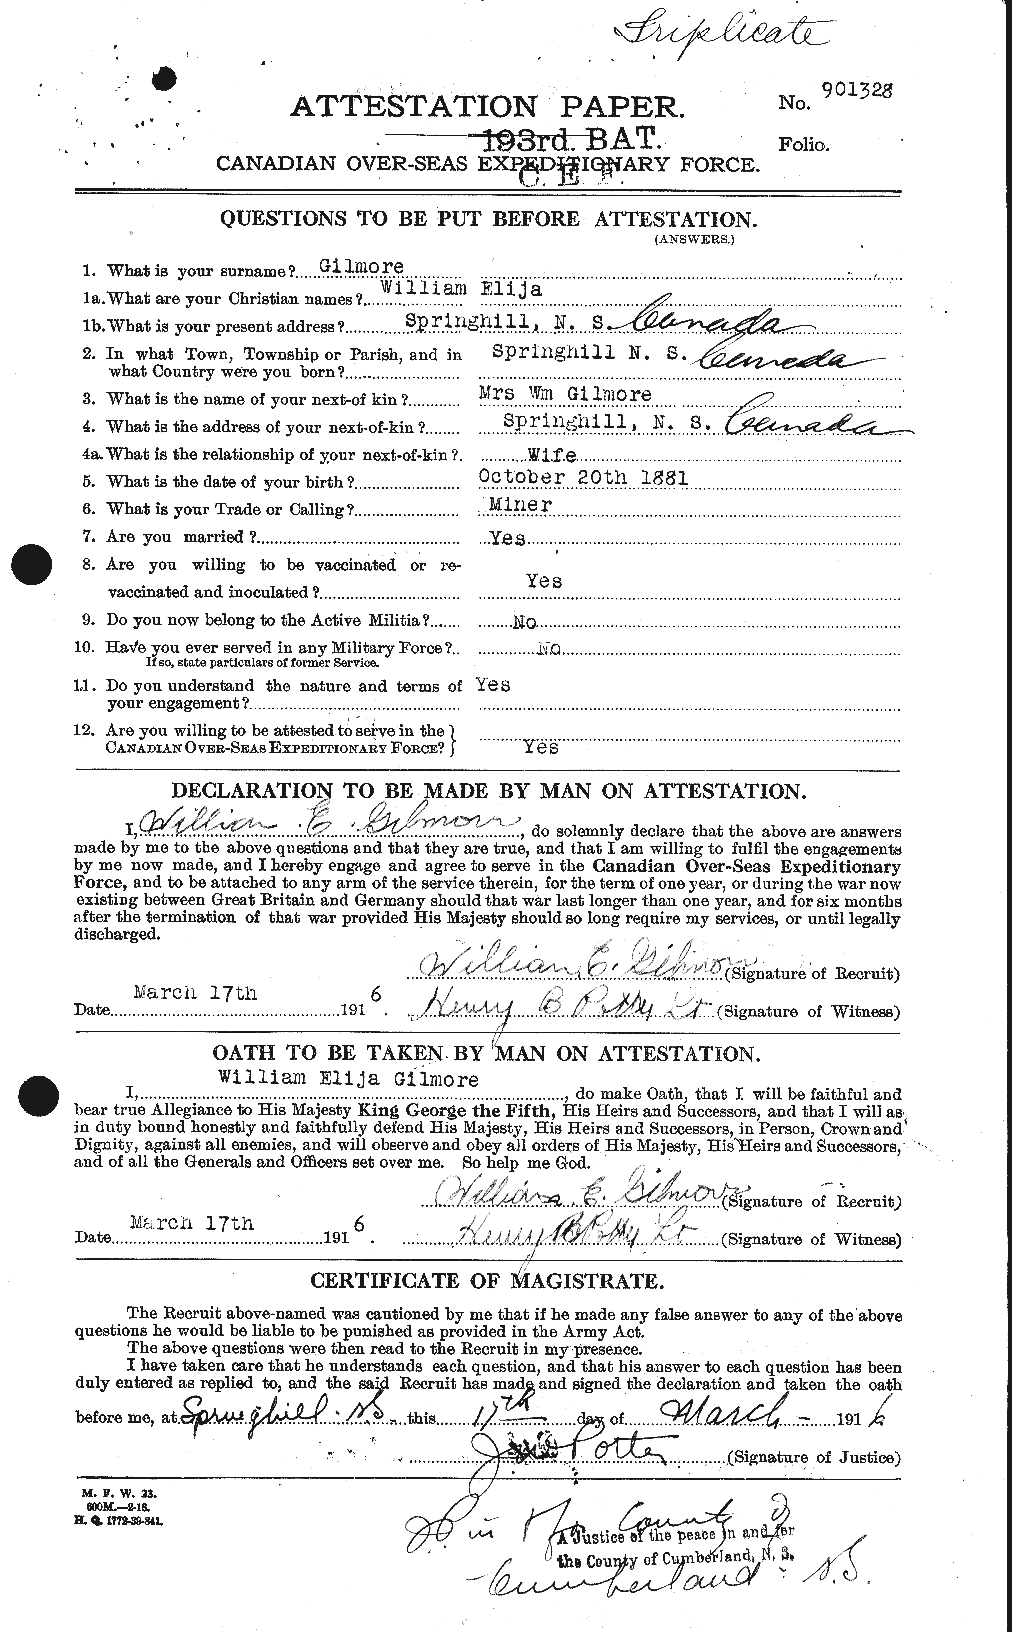 Personnel Records of the First World War - CEF 350906a